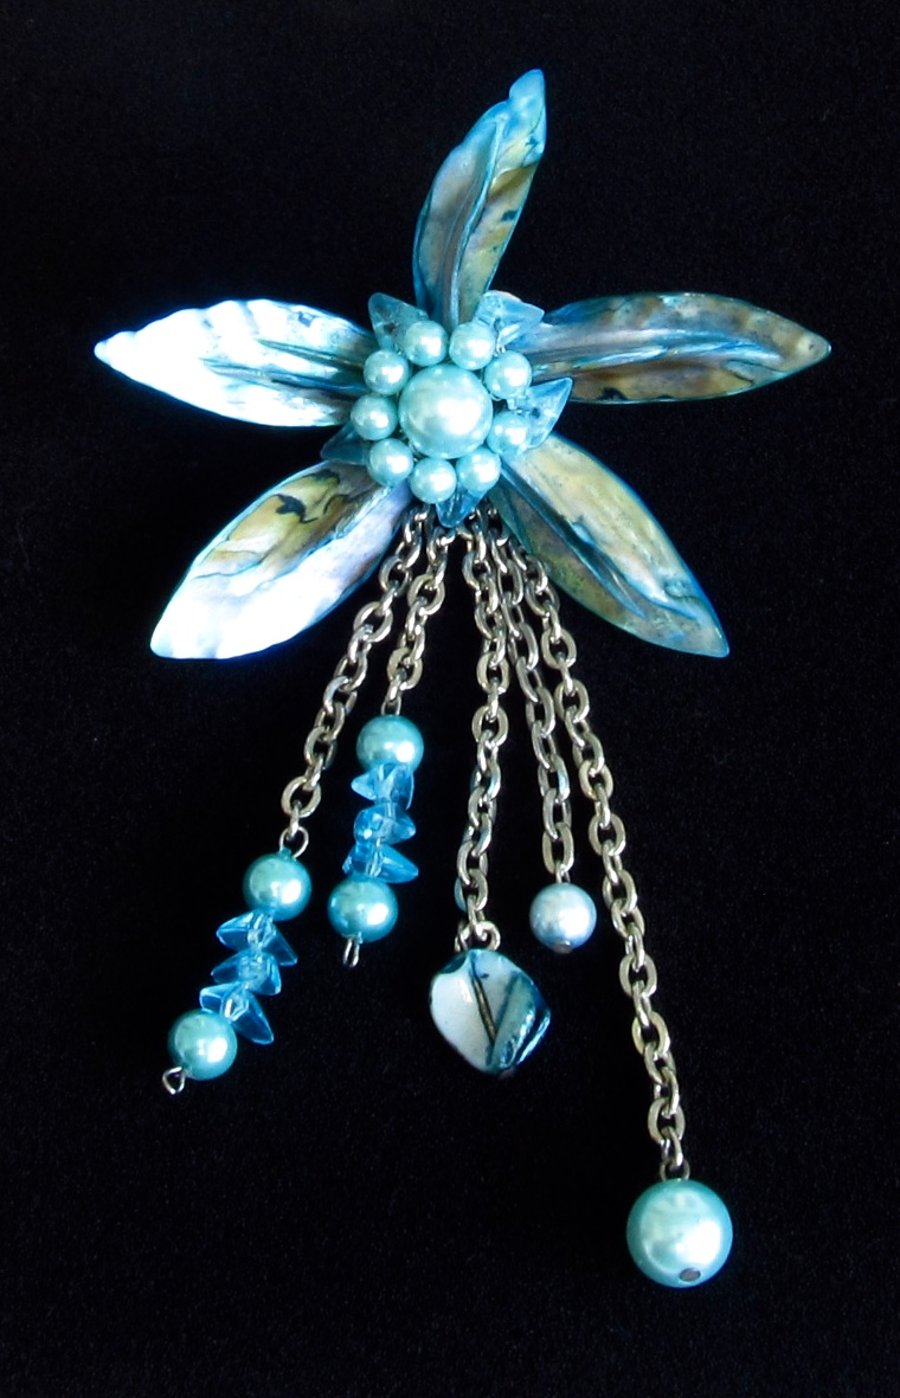 Shell Pendant: Large Light Blue MoP Shell Flower with Chains, Pearls & Beads